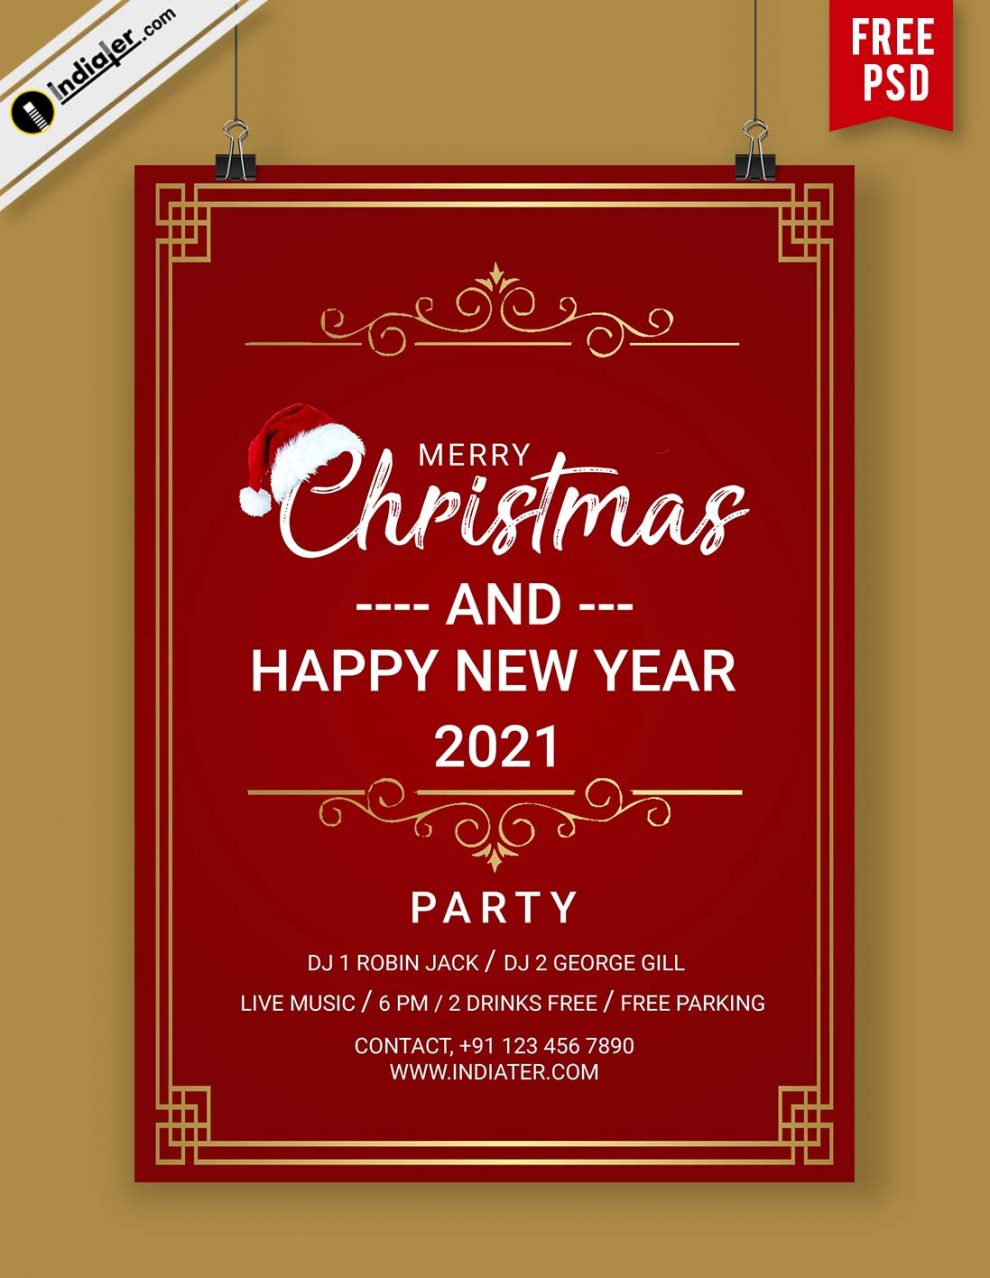 Free Poster for the Christmas and New Year Party. Invitation Card in Red  Background - Indiater